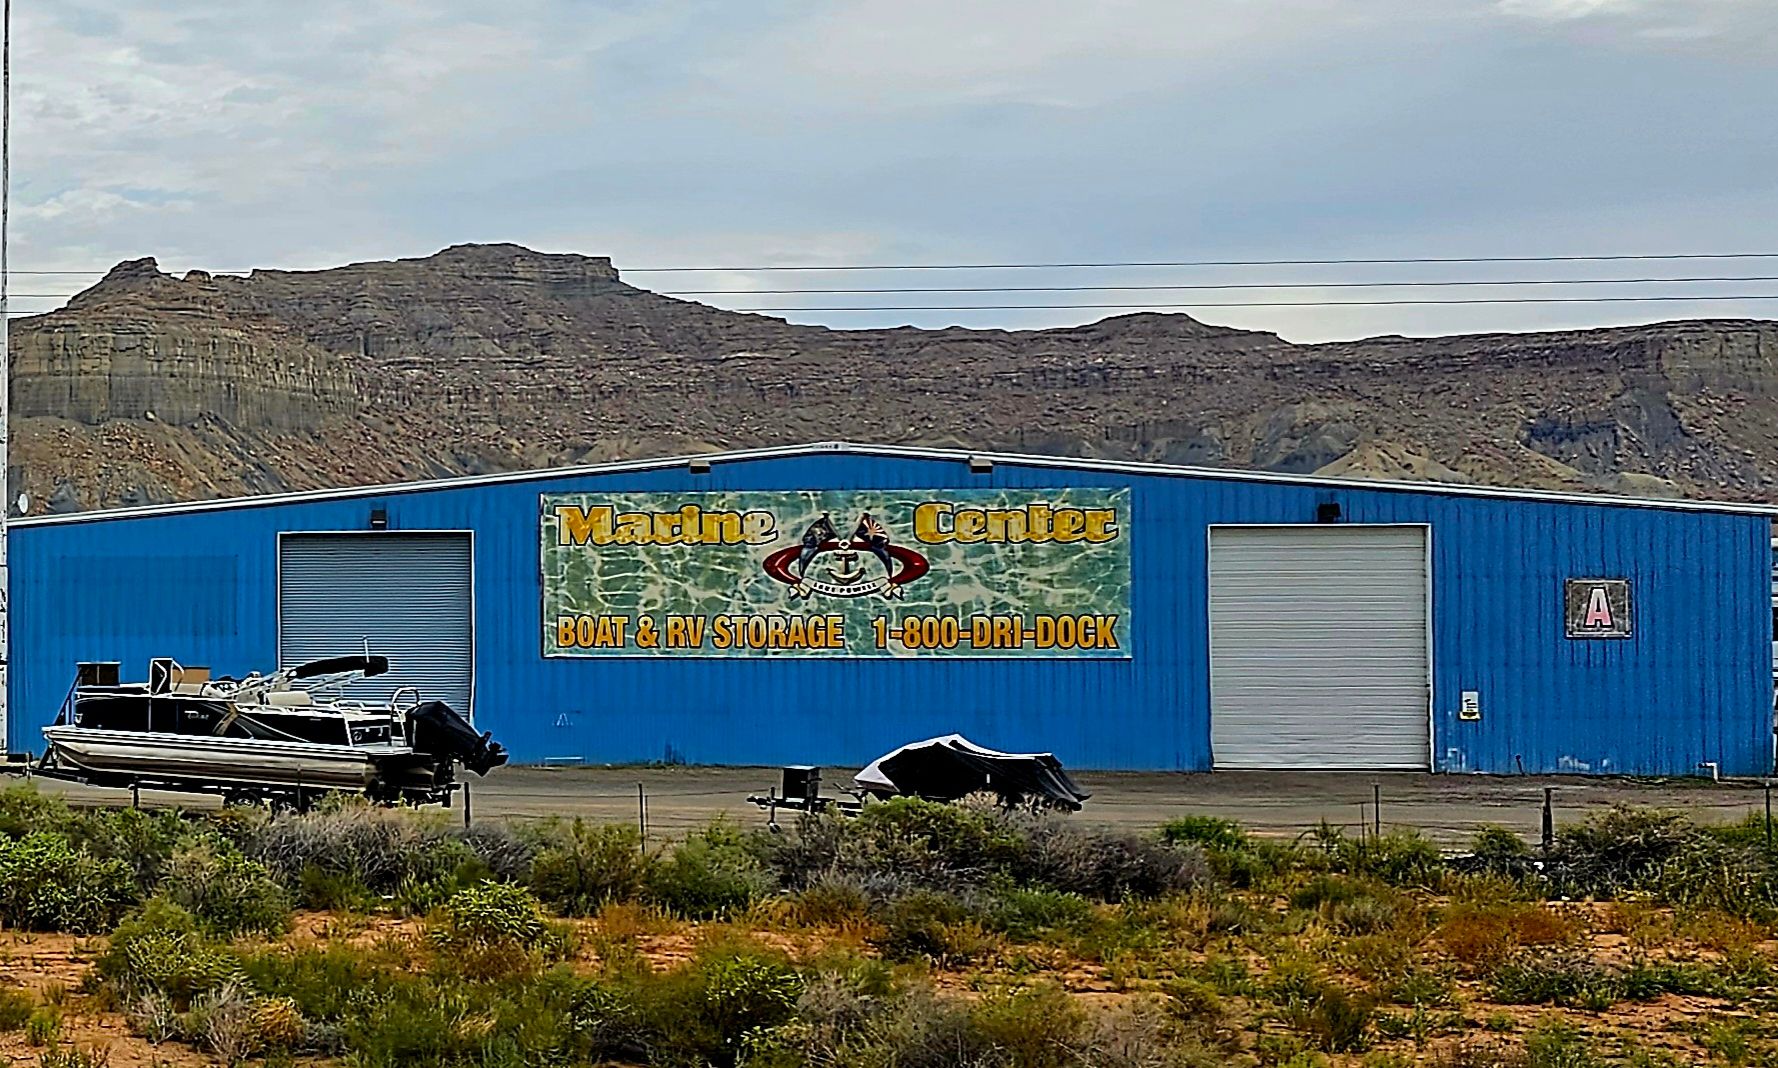 Services & Products Marine Center Boat & RV Storage in Big Water UT